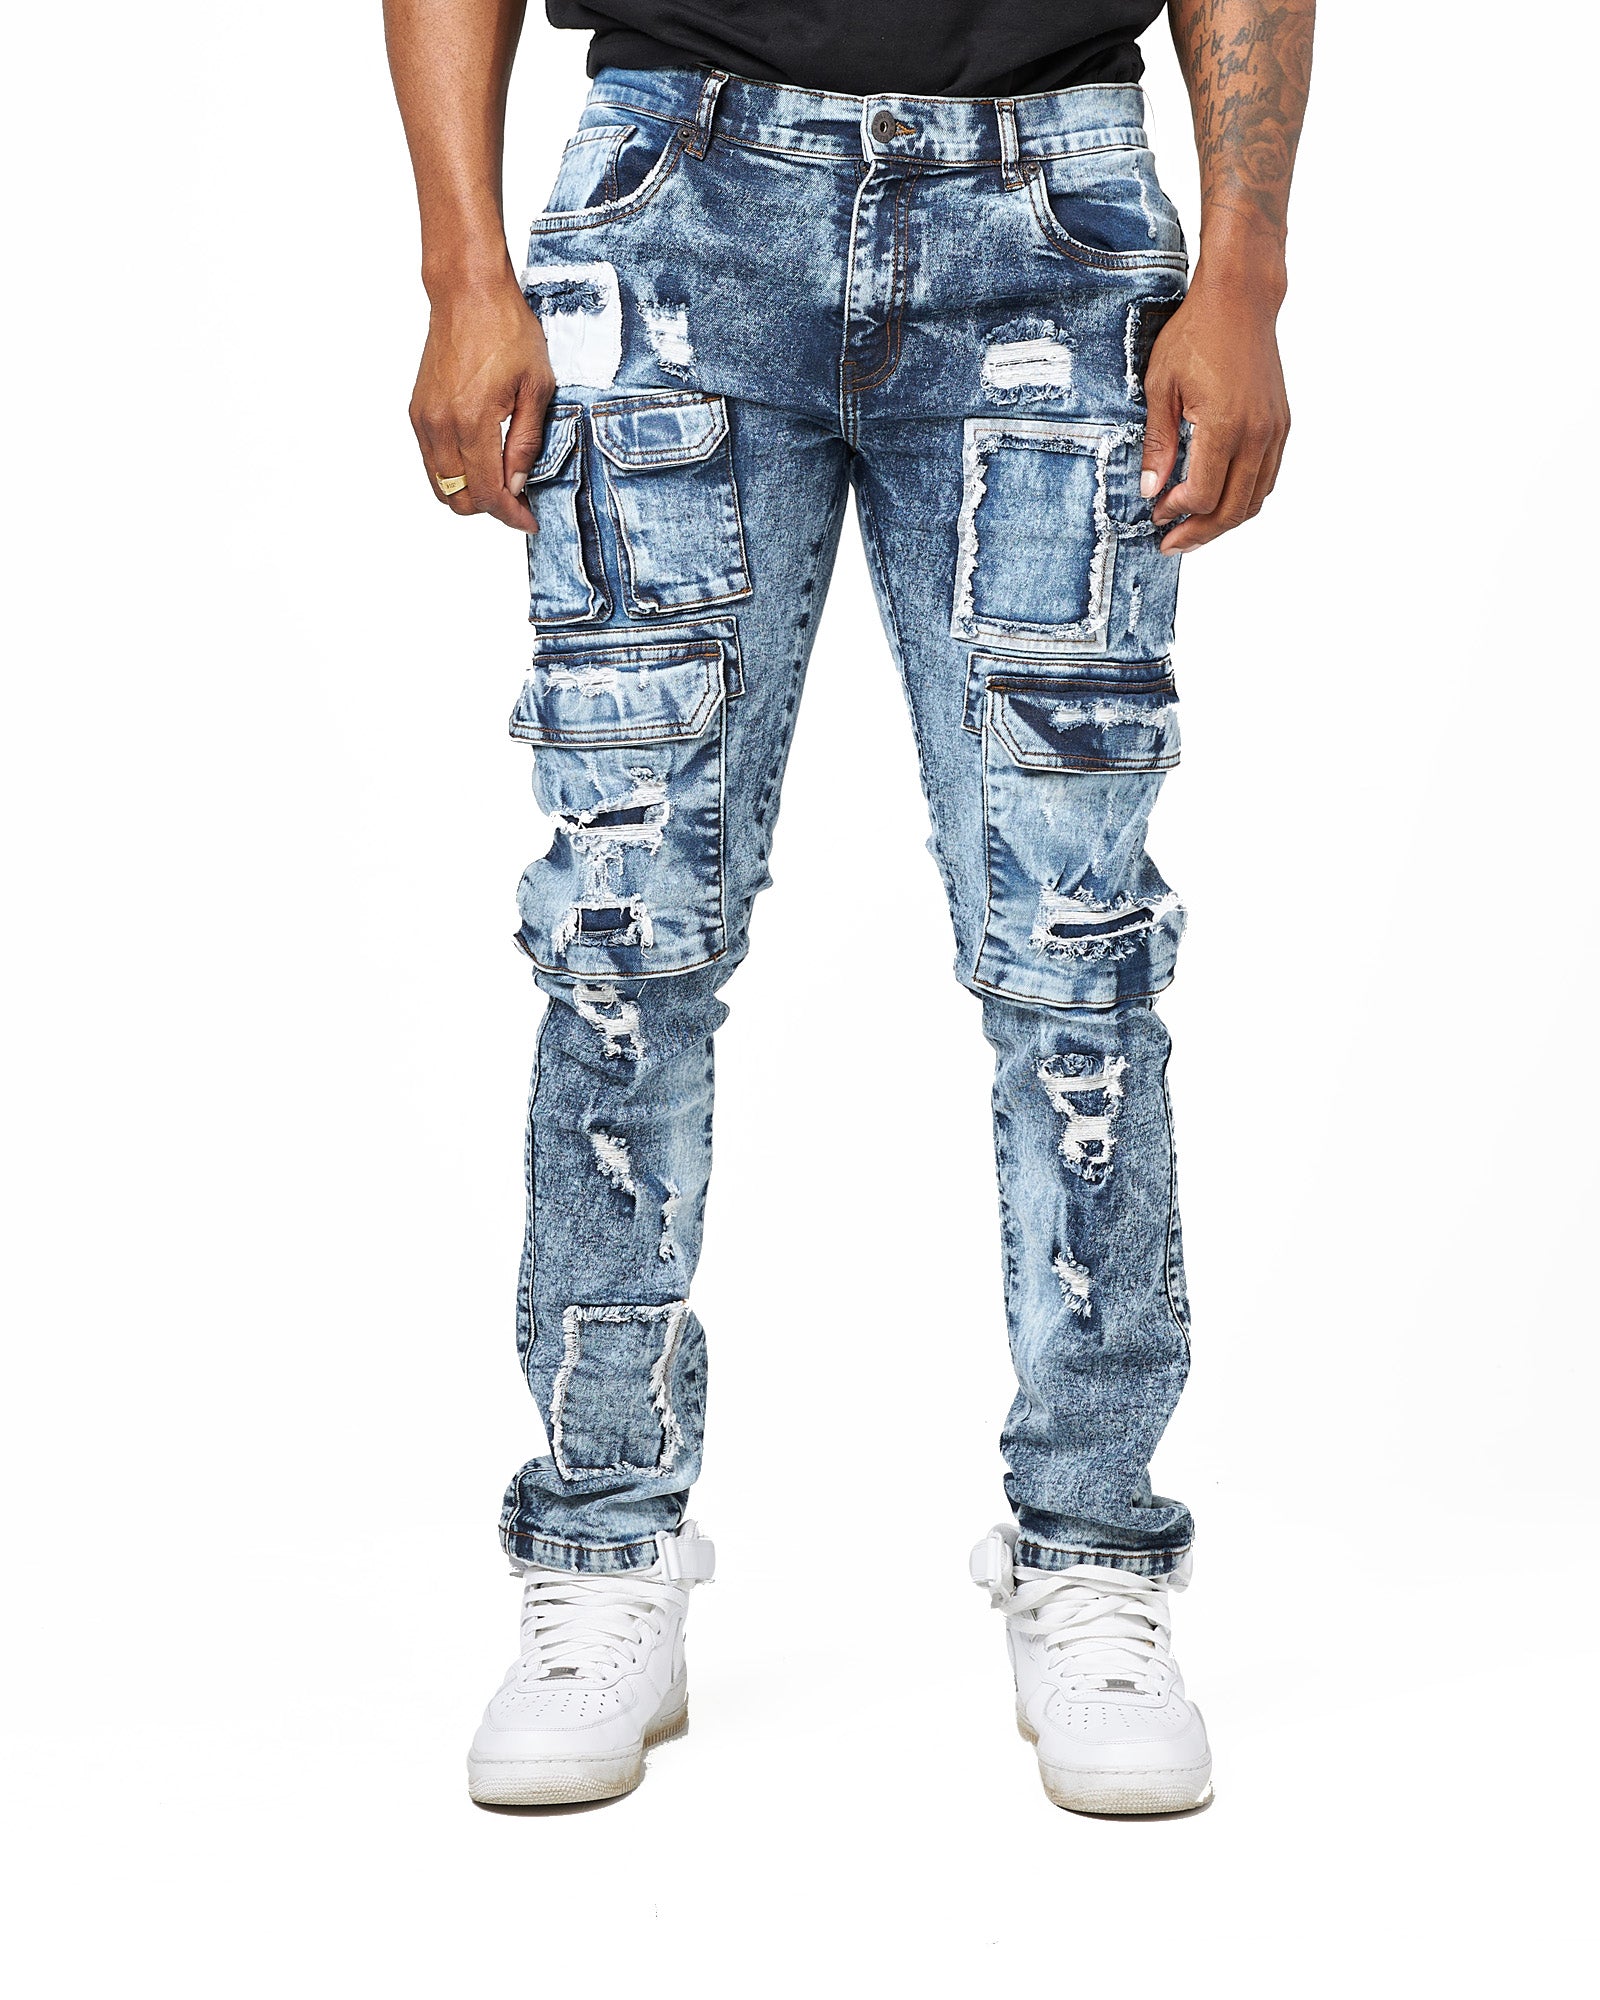 WASHED OUT CARGO REPAIR SLIM FIT JEANS- INDIGO WASH